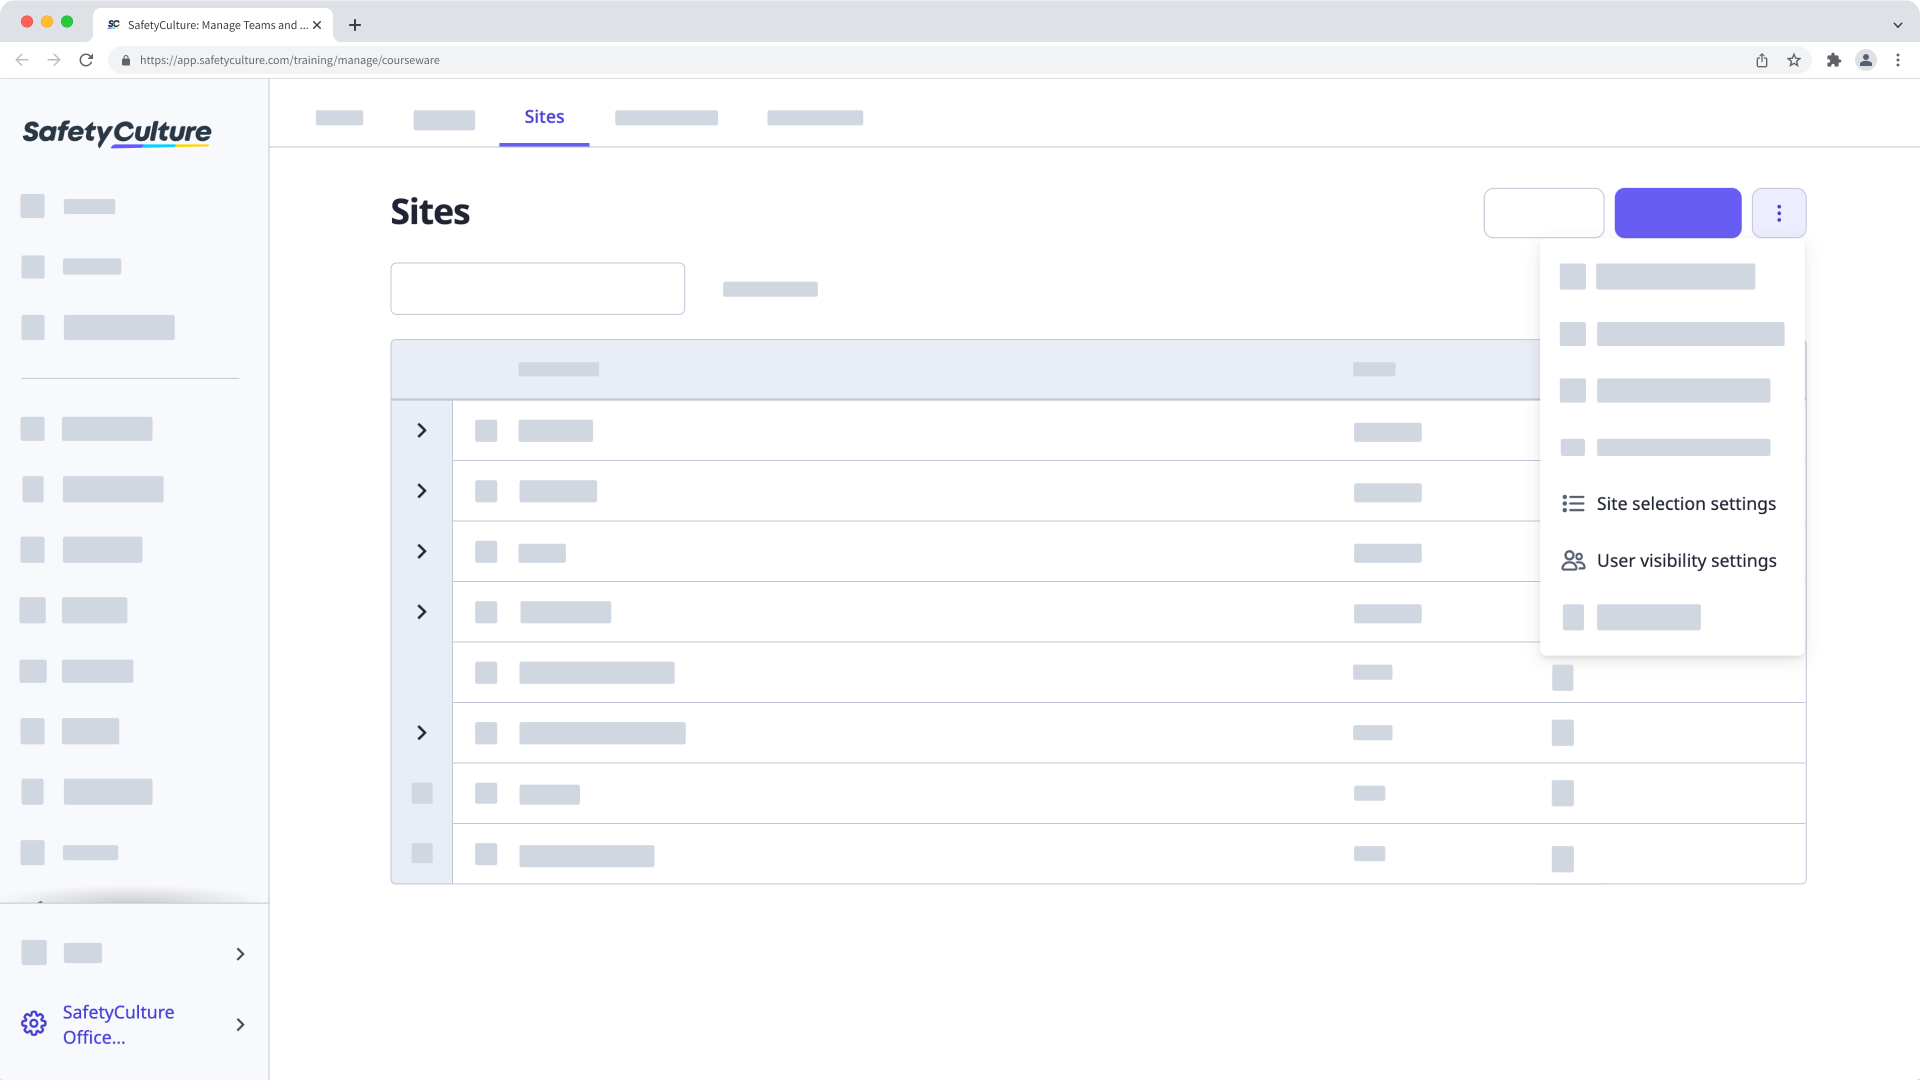 View site settings (site selection settings and user visibility settings) on the web app.